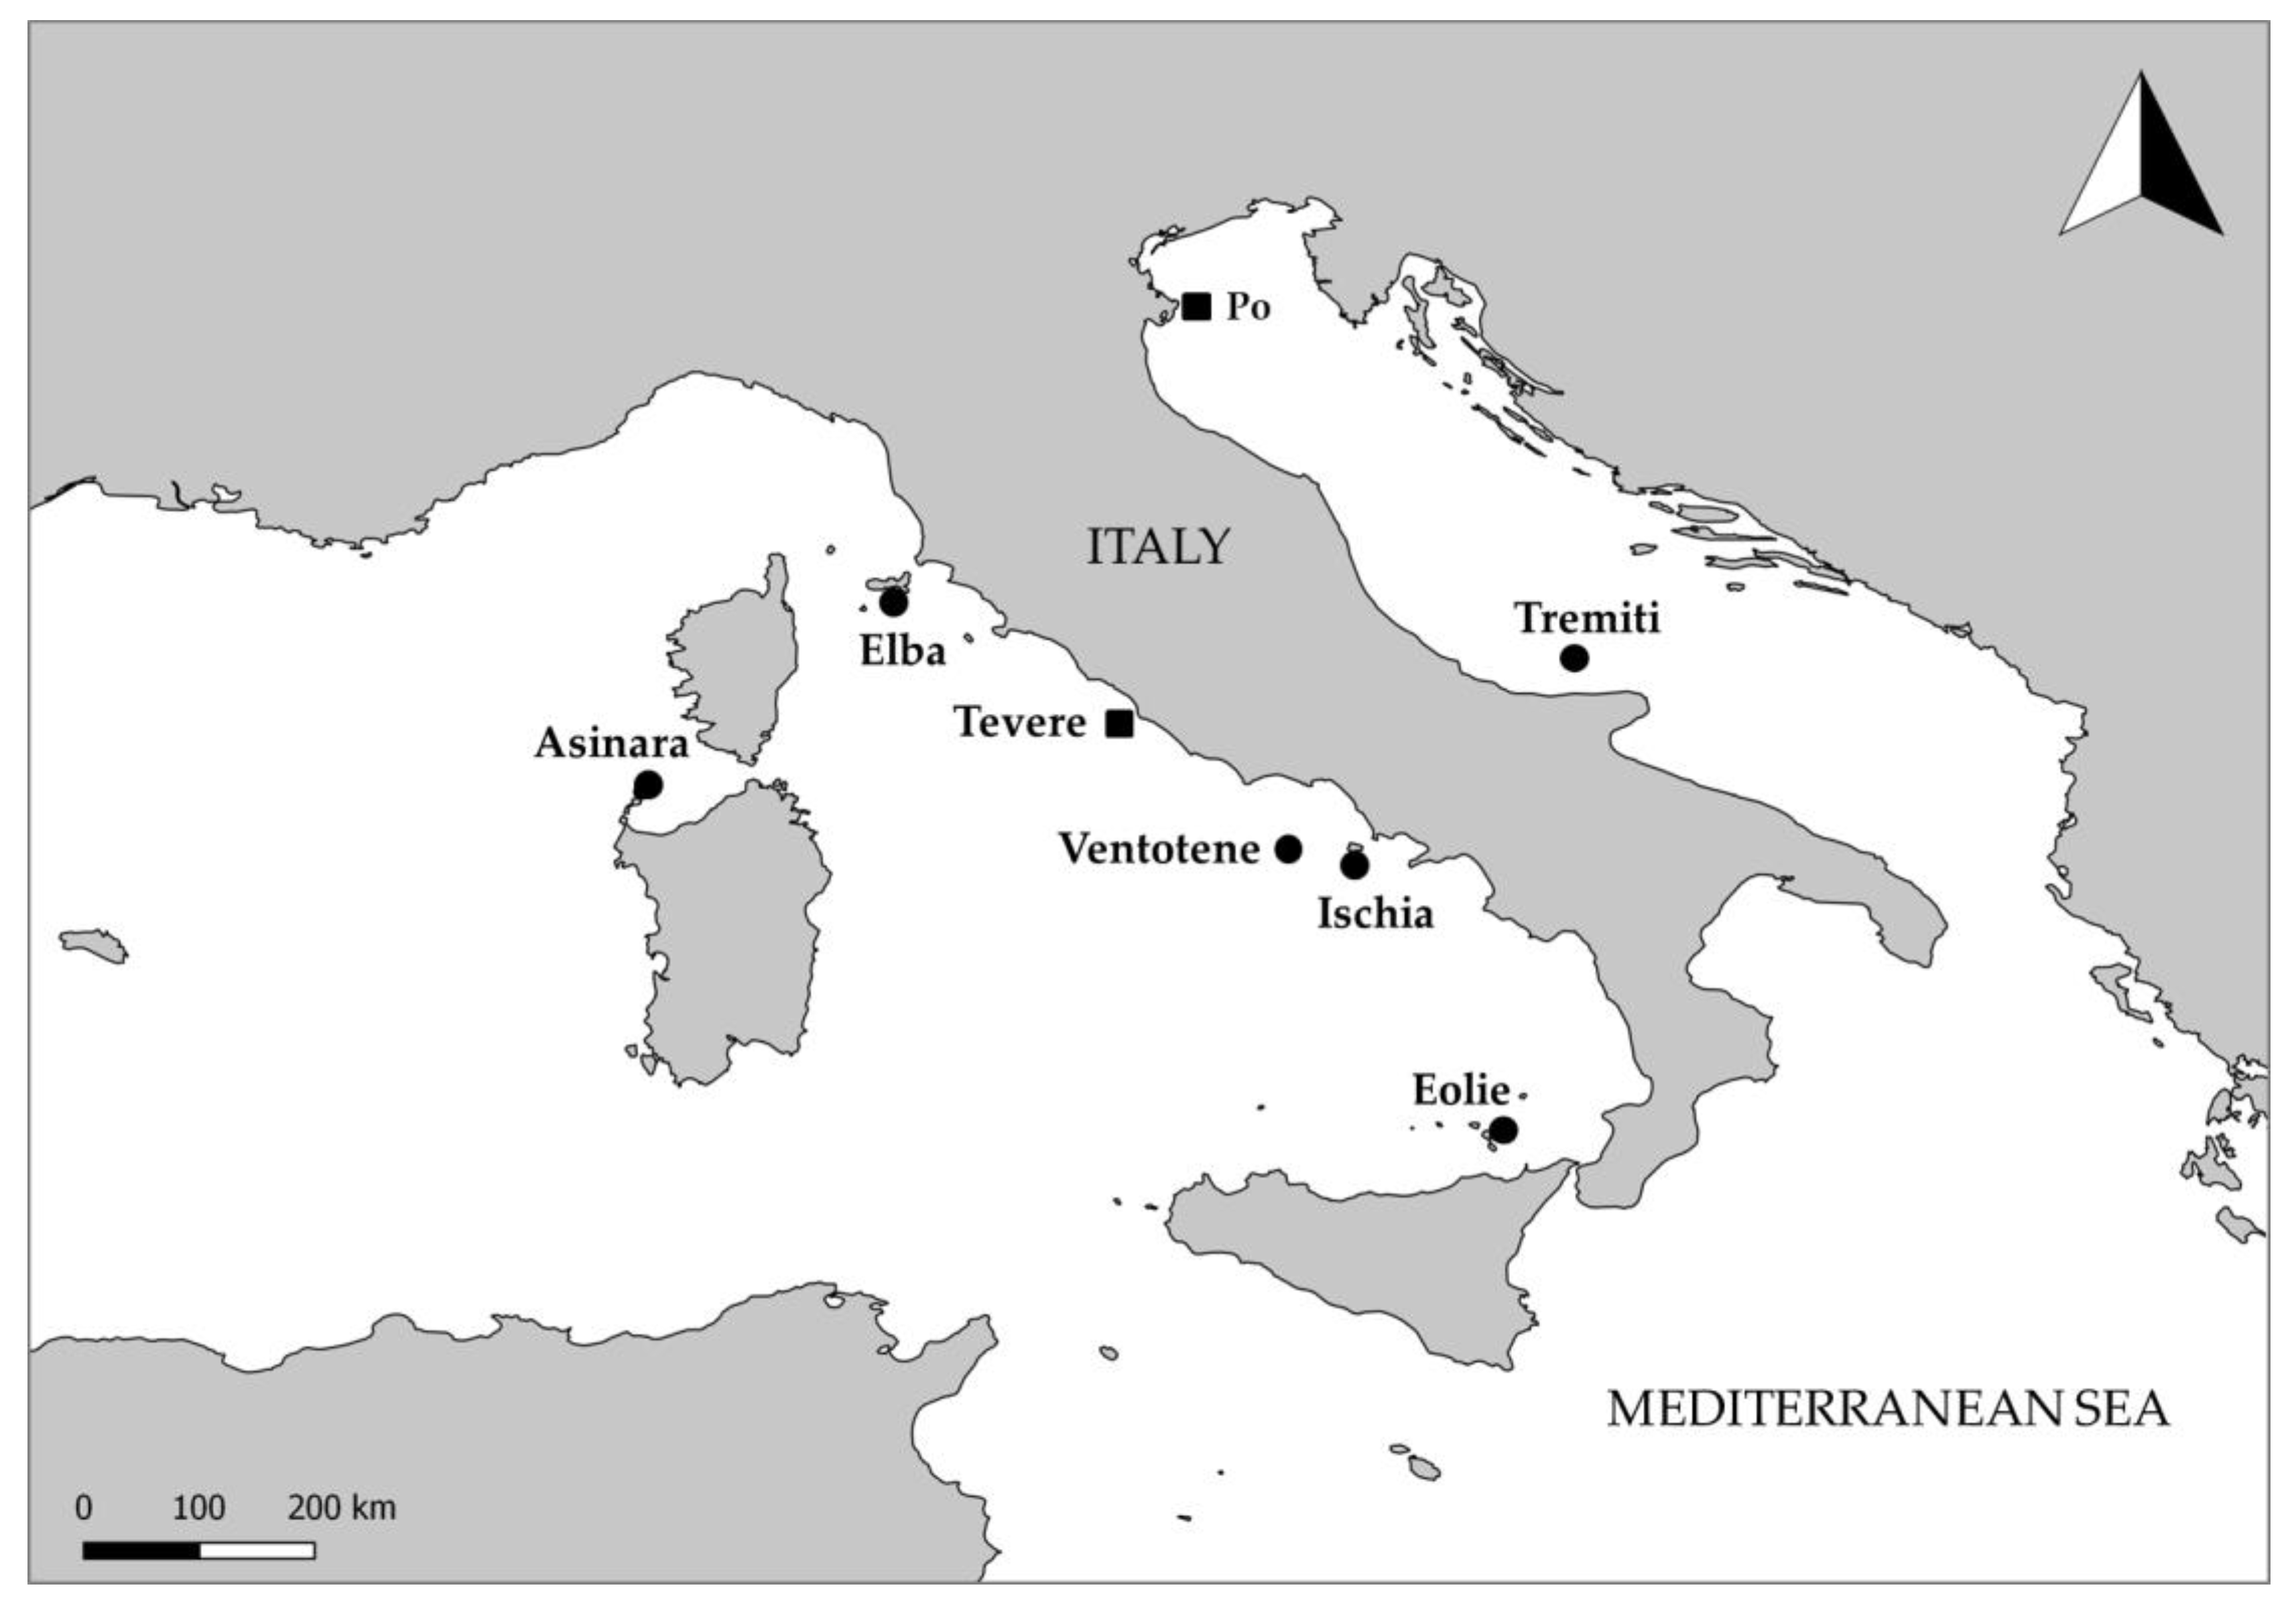 Water | Free Full-Text | Sea Water Contamination in the Vicinity of the  Italian Minor Islands Caused by Microplastic Pollution